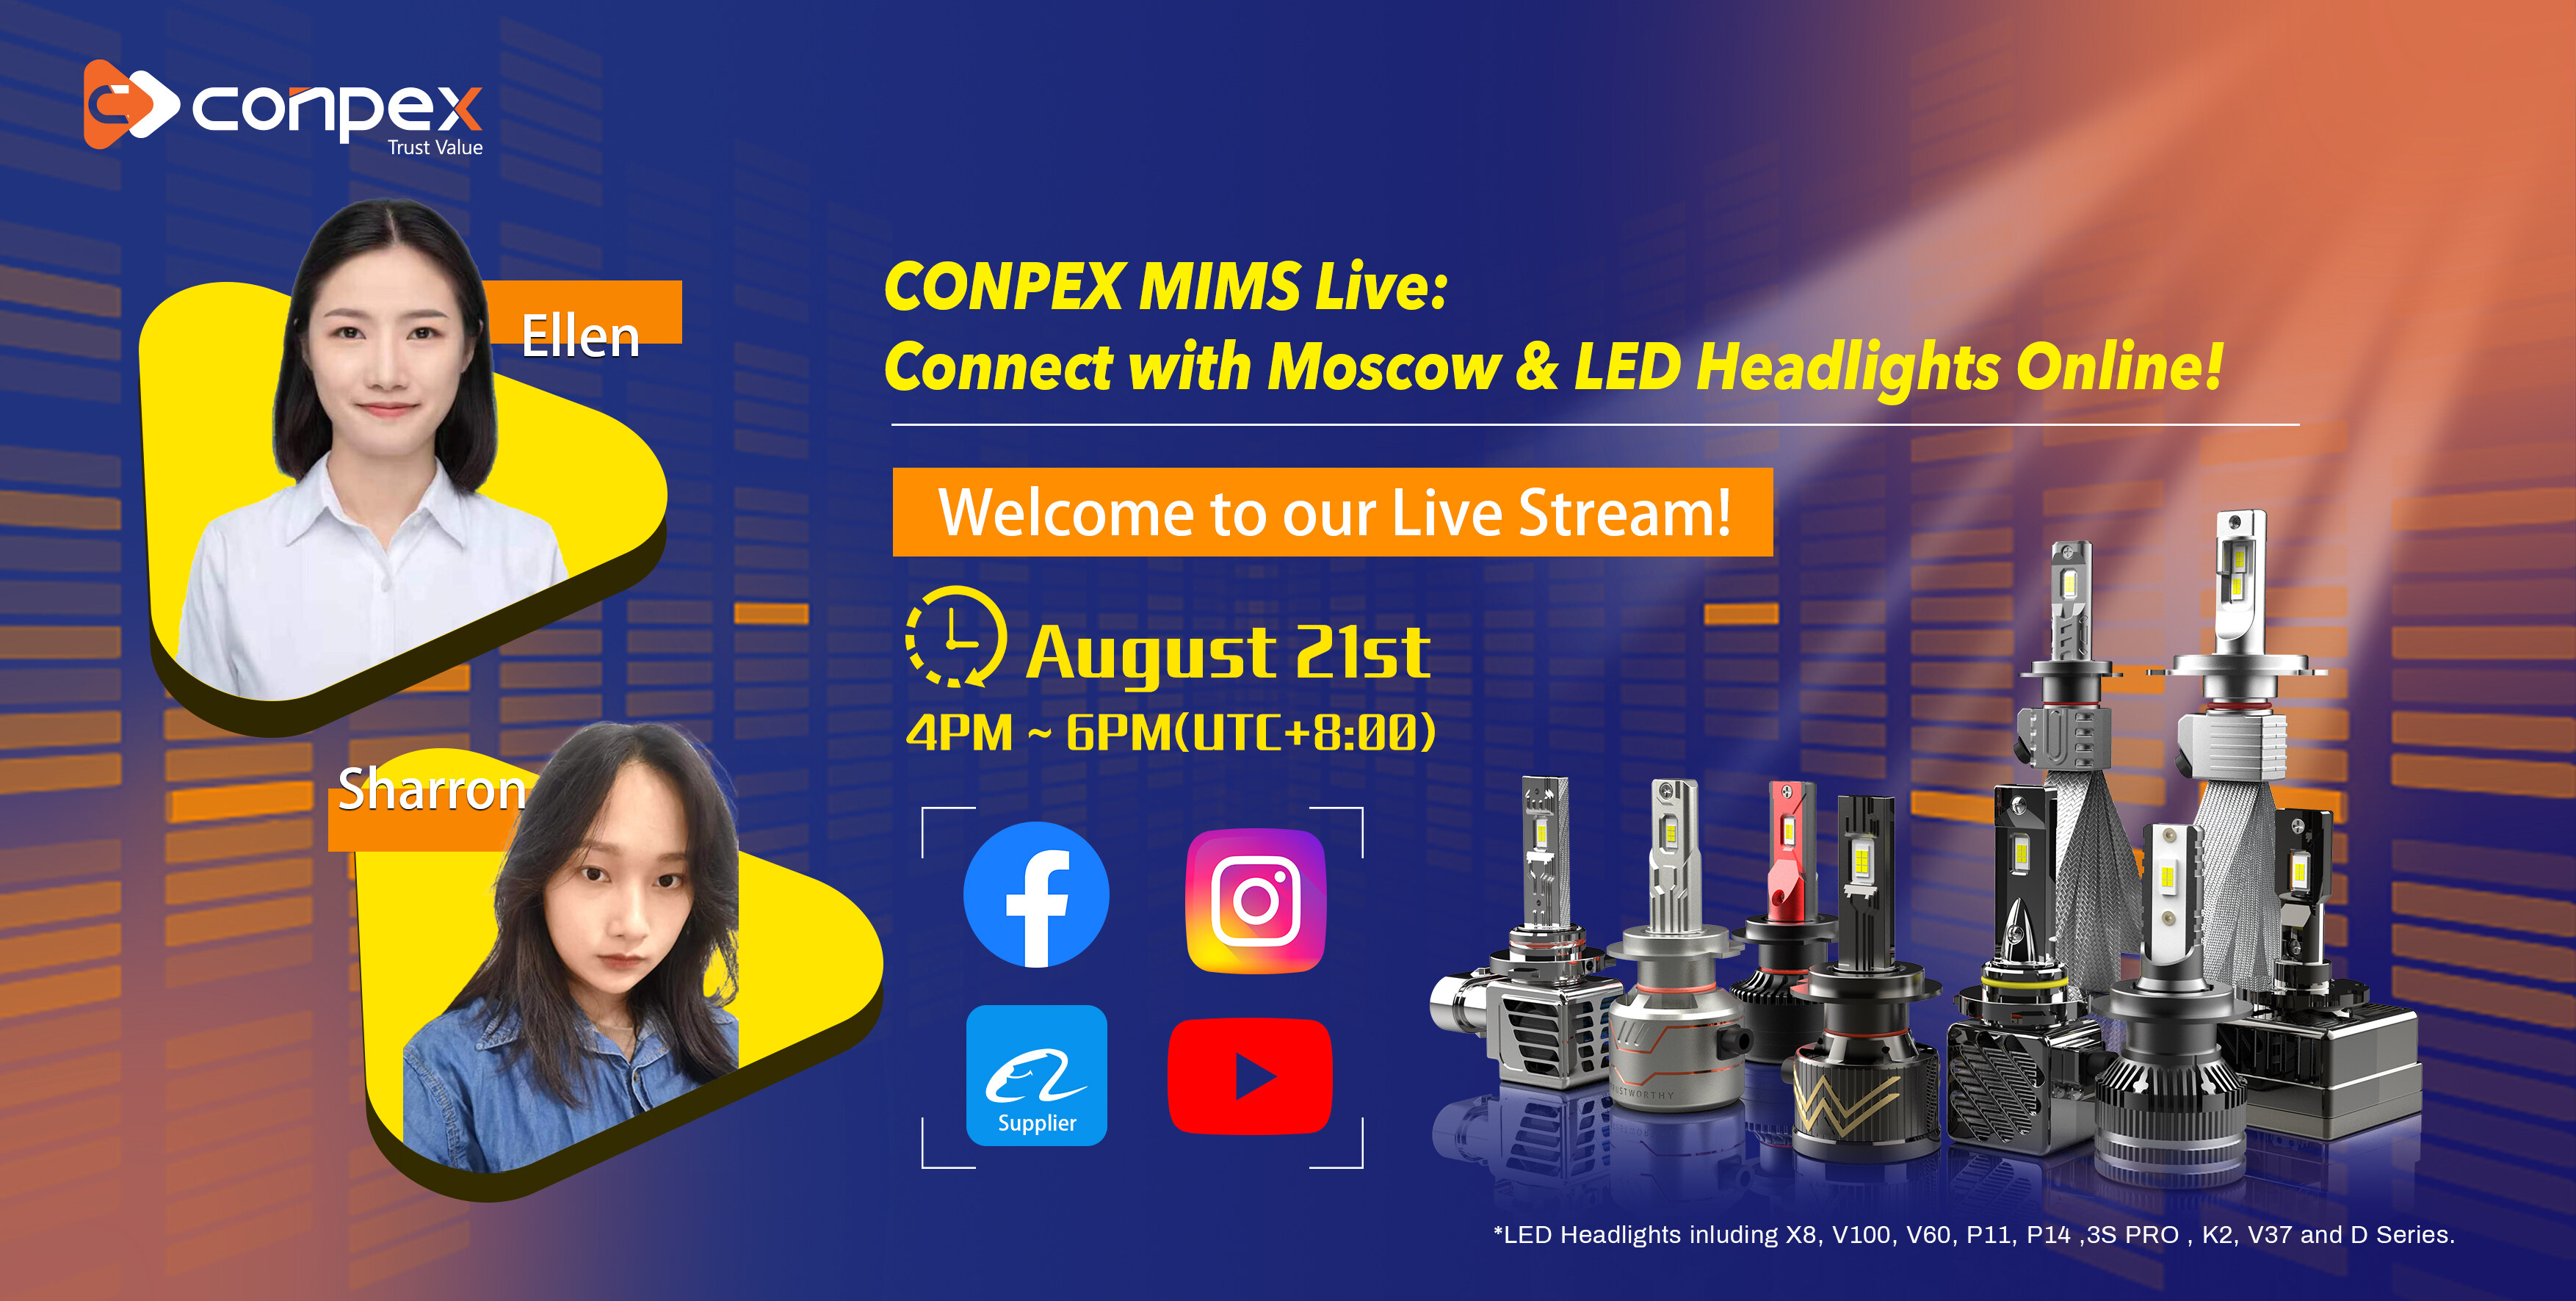 CONPEX MIMS Live: Connect with Moscow & LED Headlights Online!